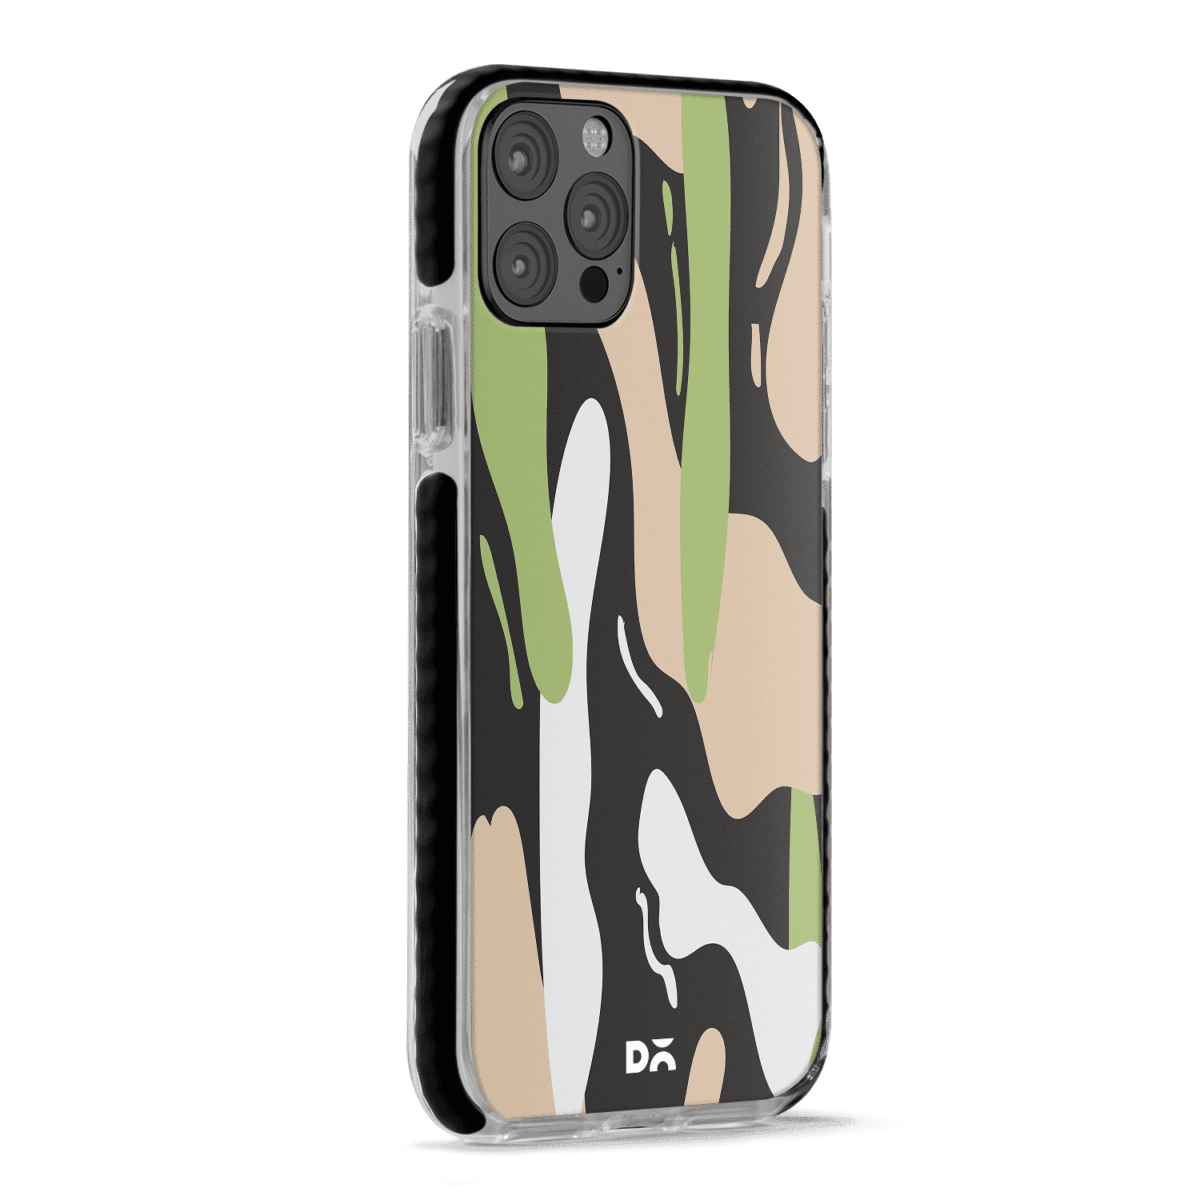 Pastel Camo Stride Case Cover for Apple iPhone 12 Pro and Apple iPhone 12 Pro Max with great design and shock proof | Klippik | Online Shopping | Kuwait UAE Saudi